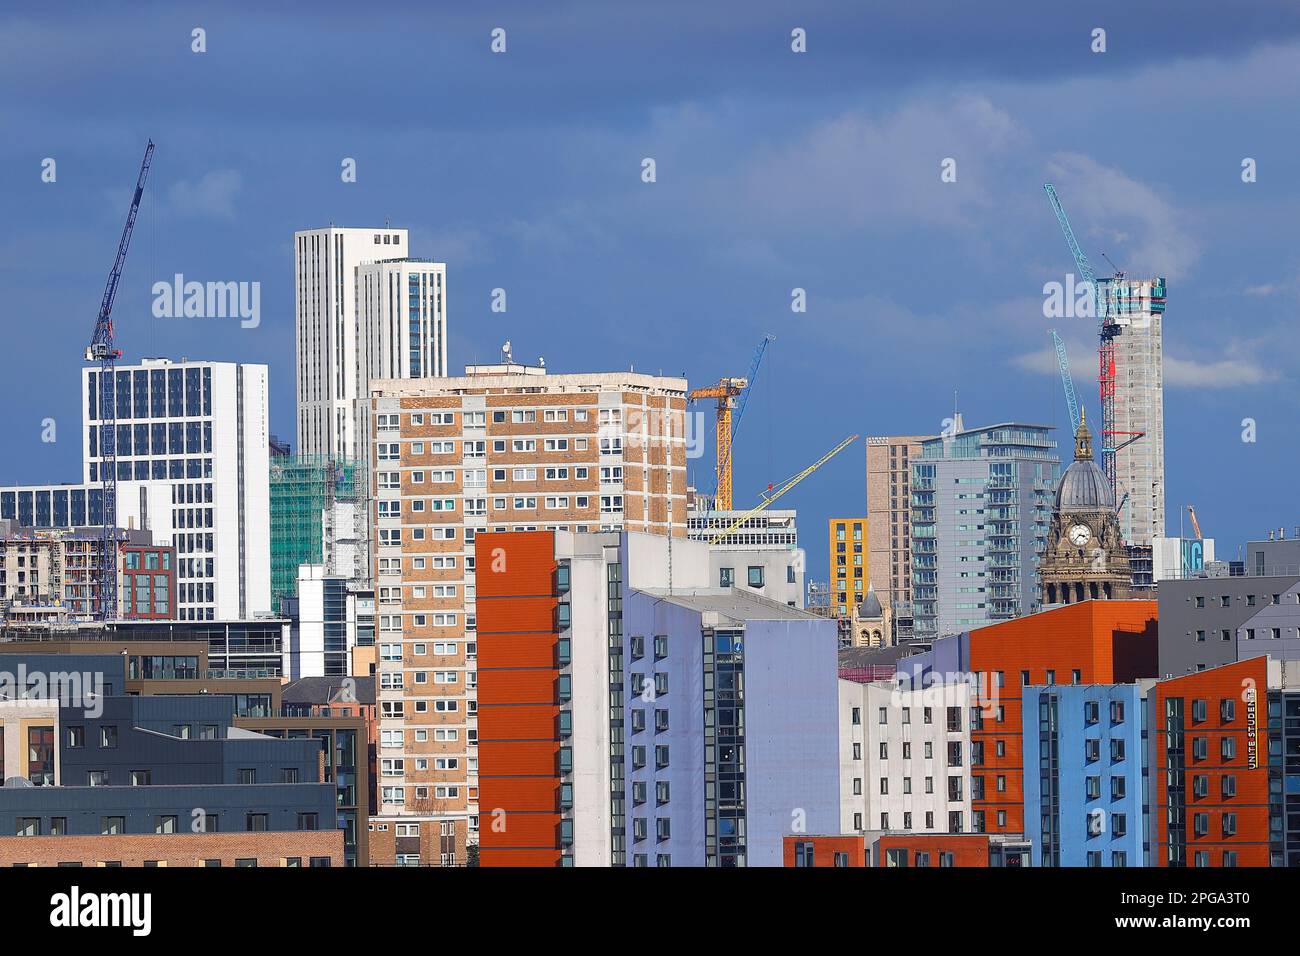 Leeds Town Hall clock tower pictured next to a 31 storey building under construction in Leeds city centre Stock Photo